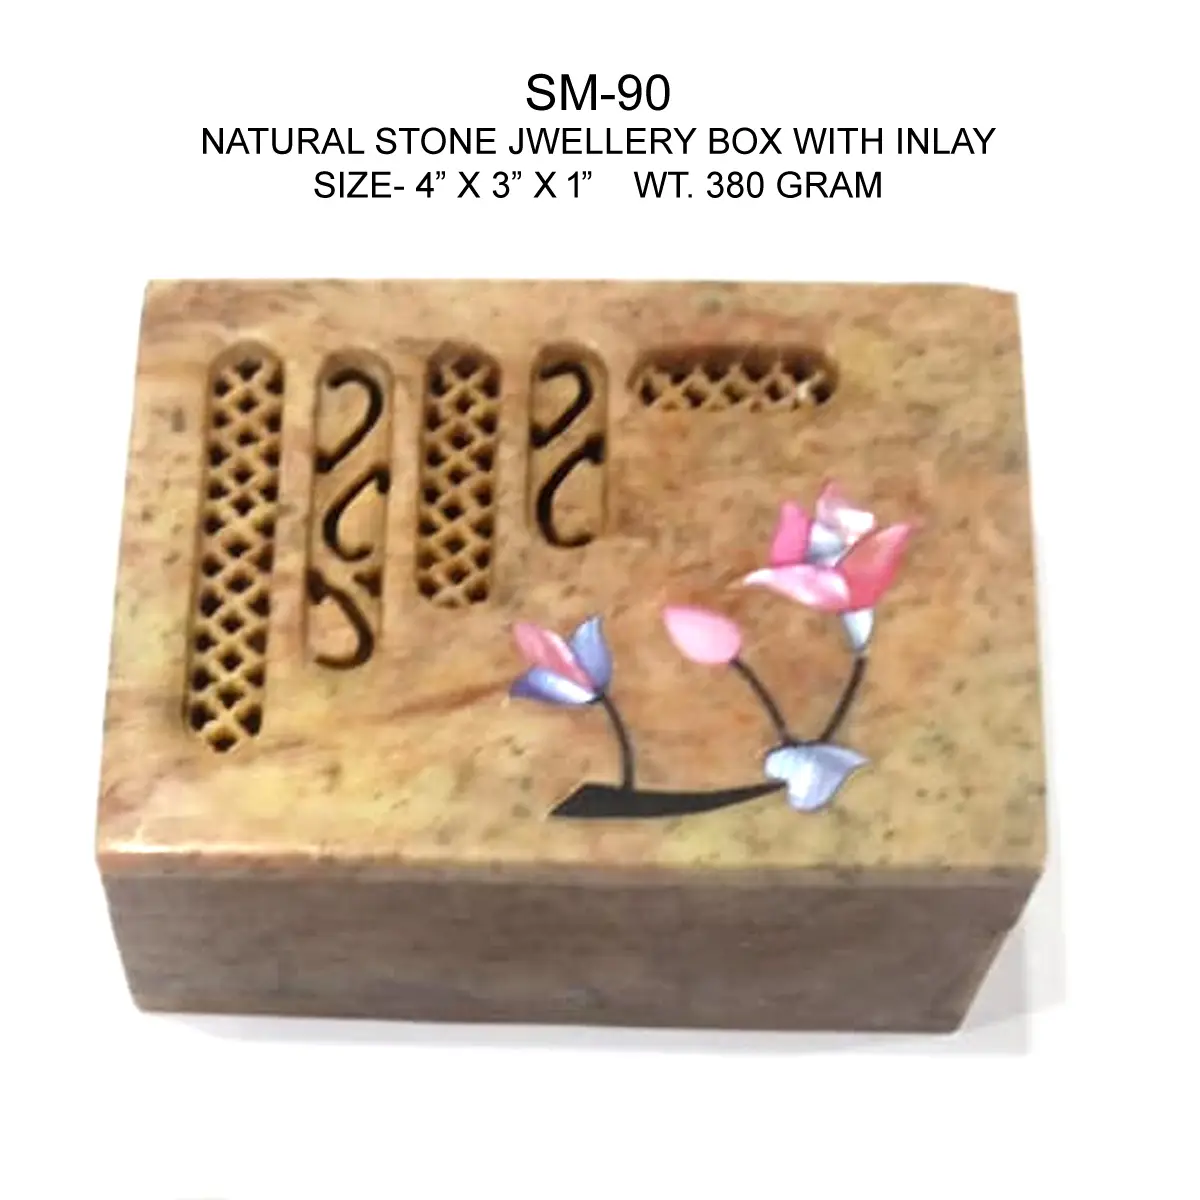 NATURAL STONE JEWELLERY BOX WITH INLAY